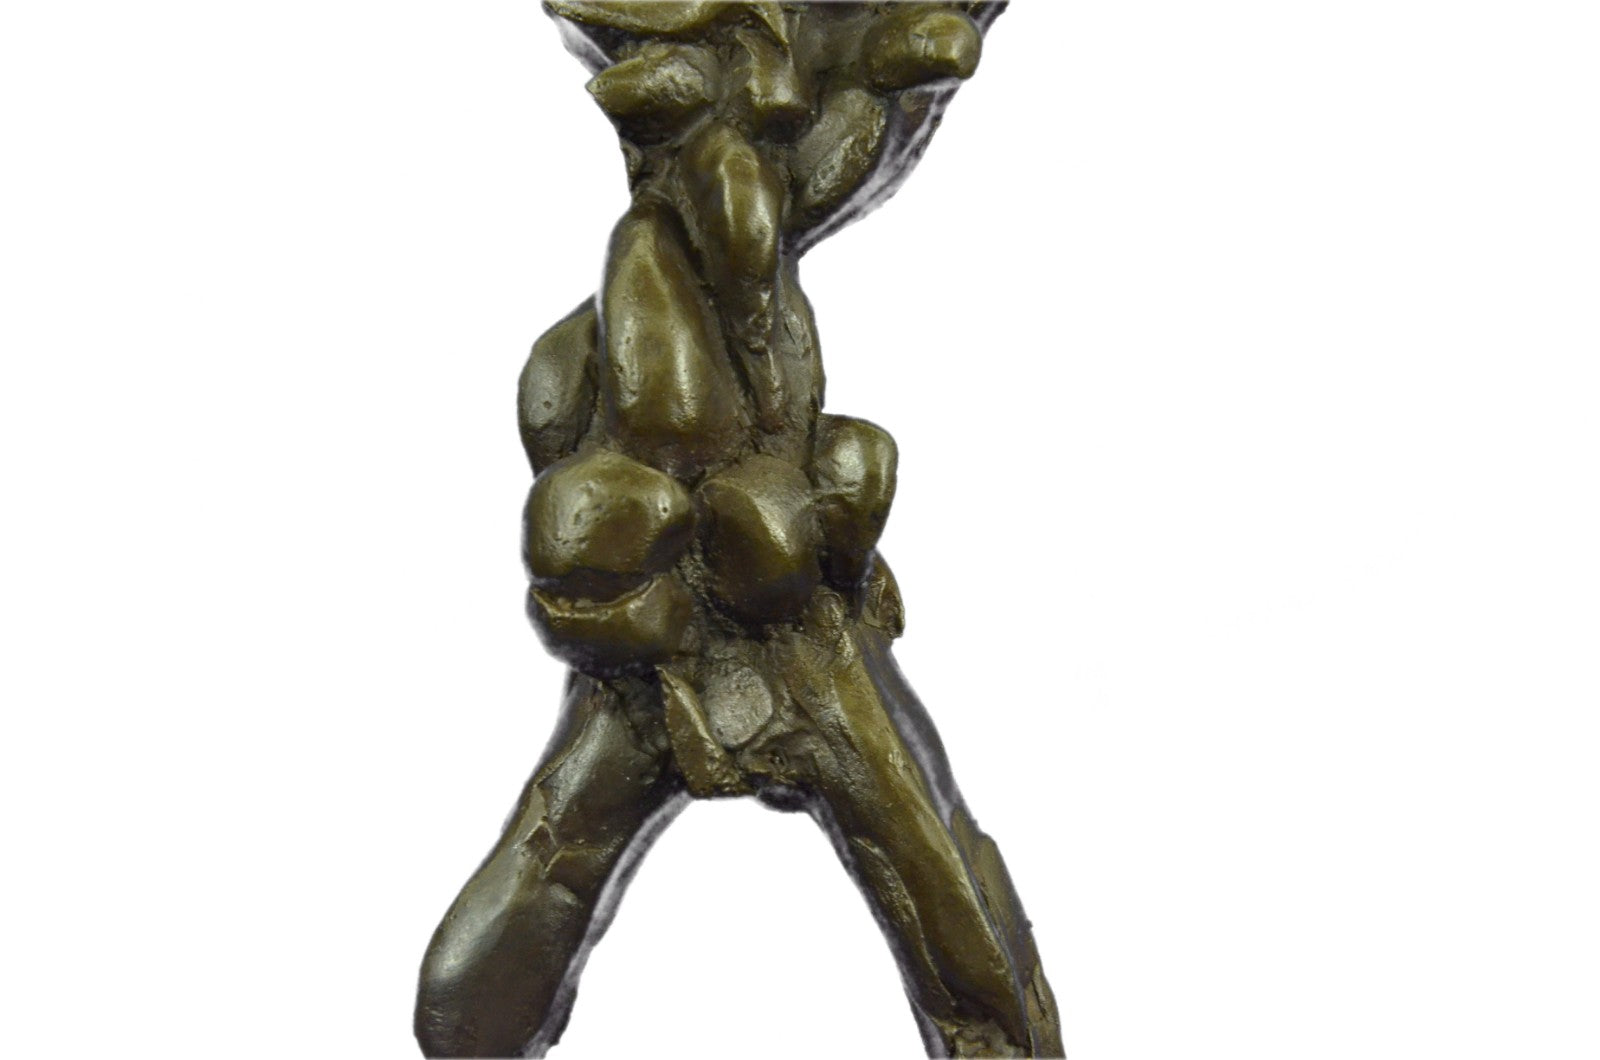 Hand Made Museum Quality Abstract Female European Made by Lost Wax Method